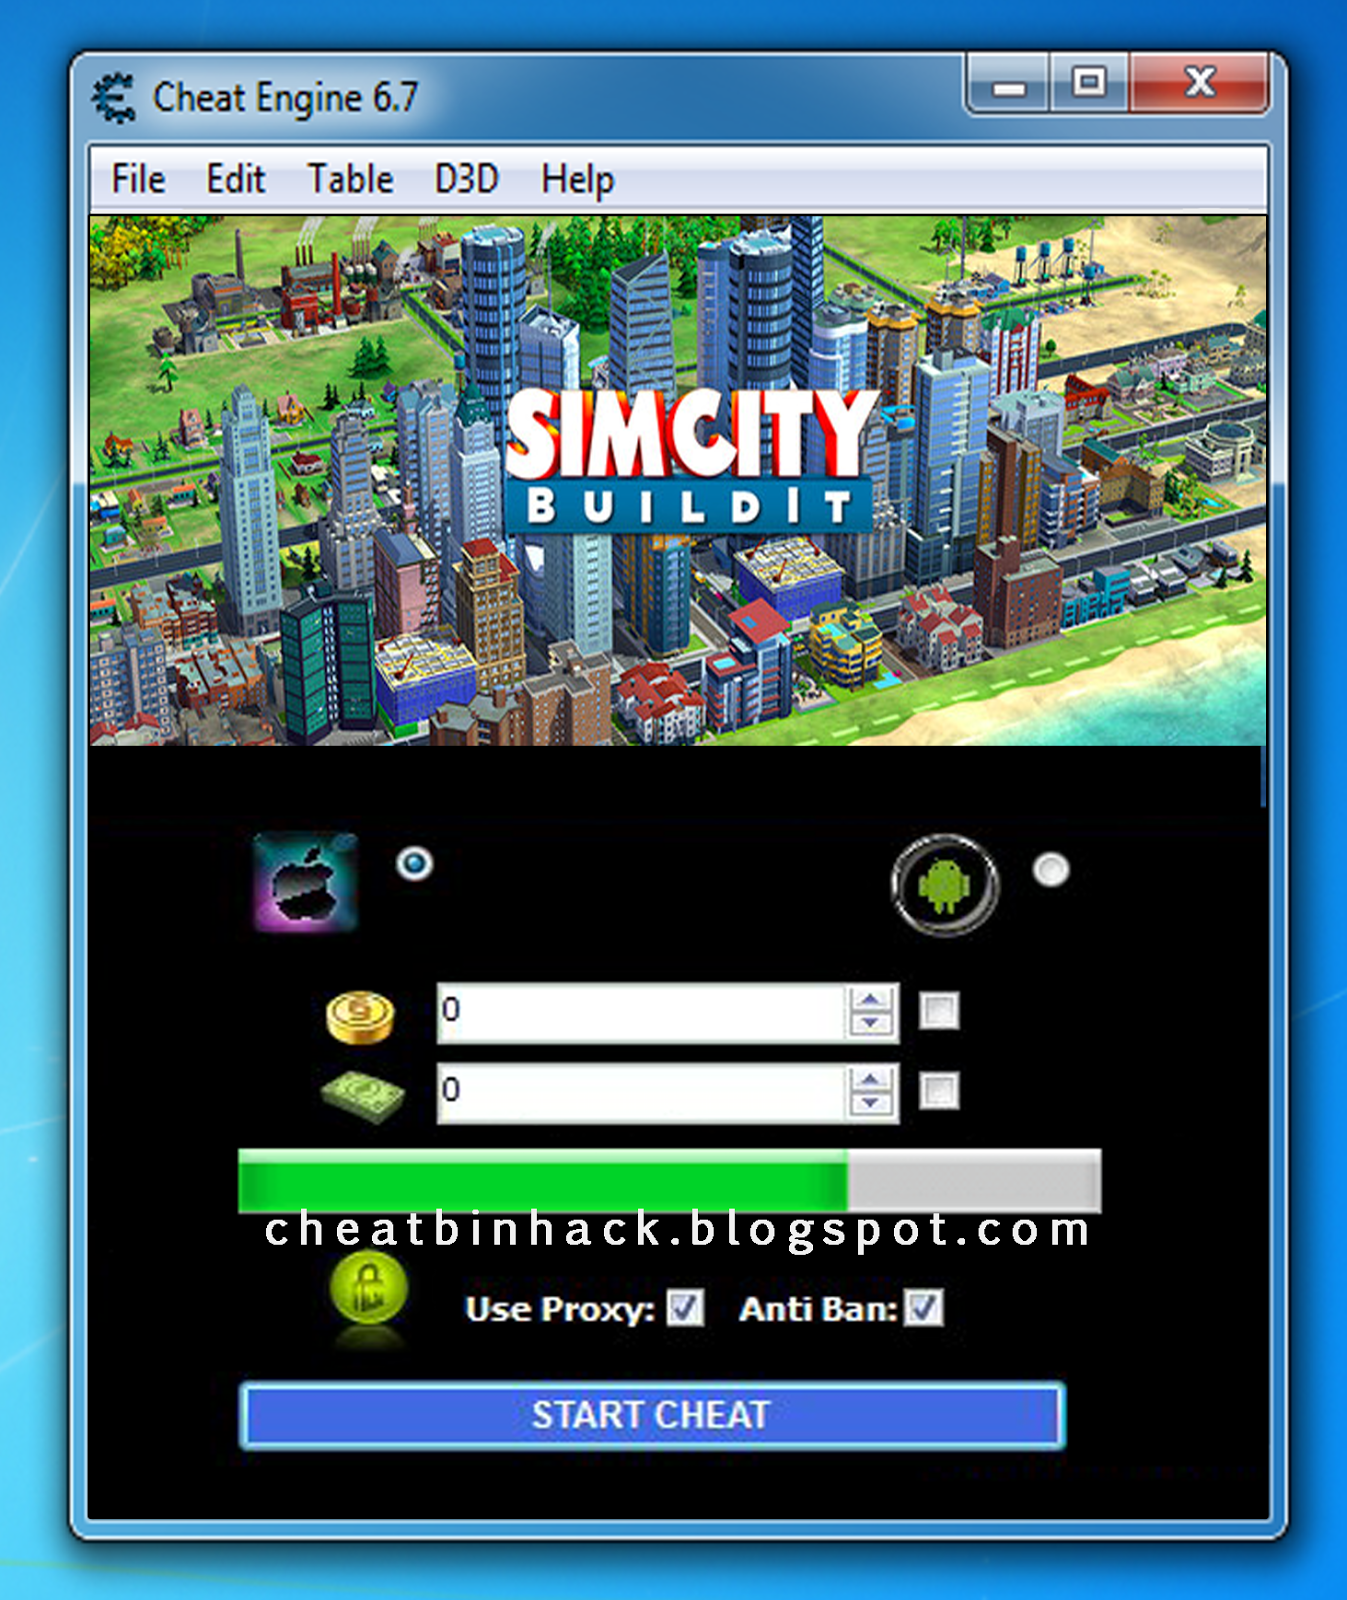 Simcity buildit cheats that actually work